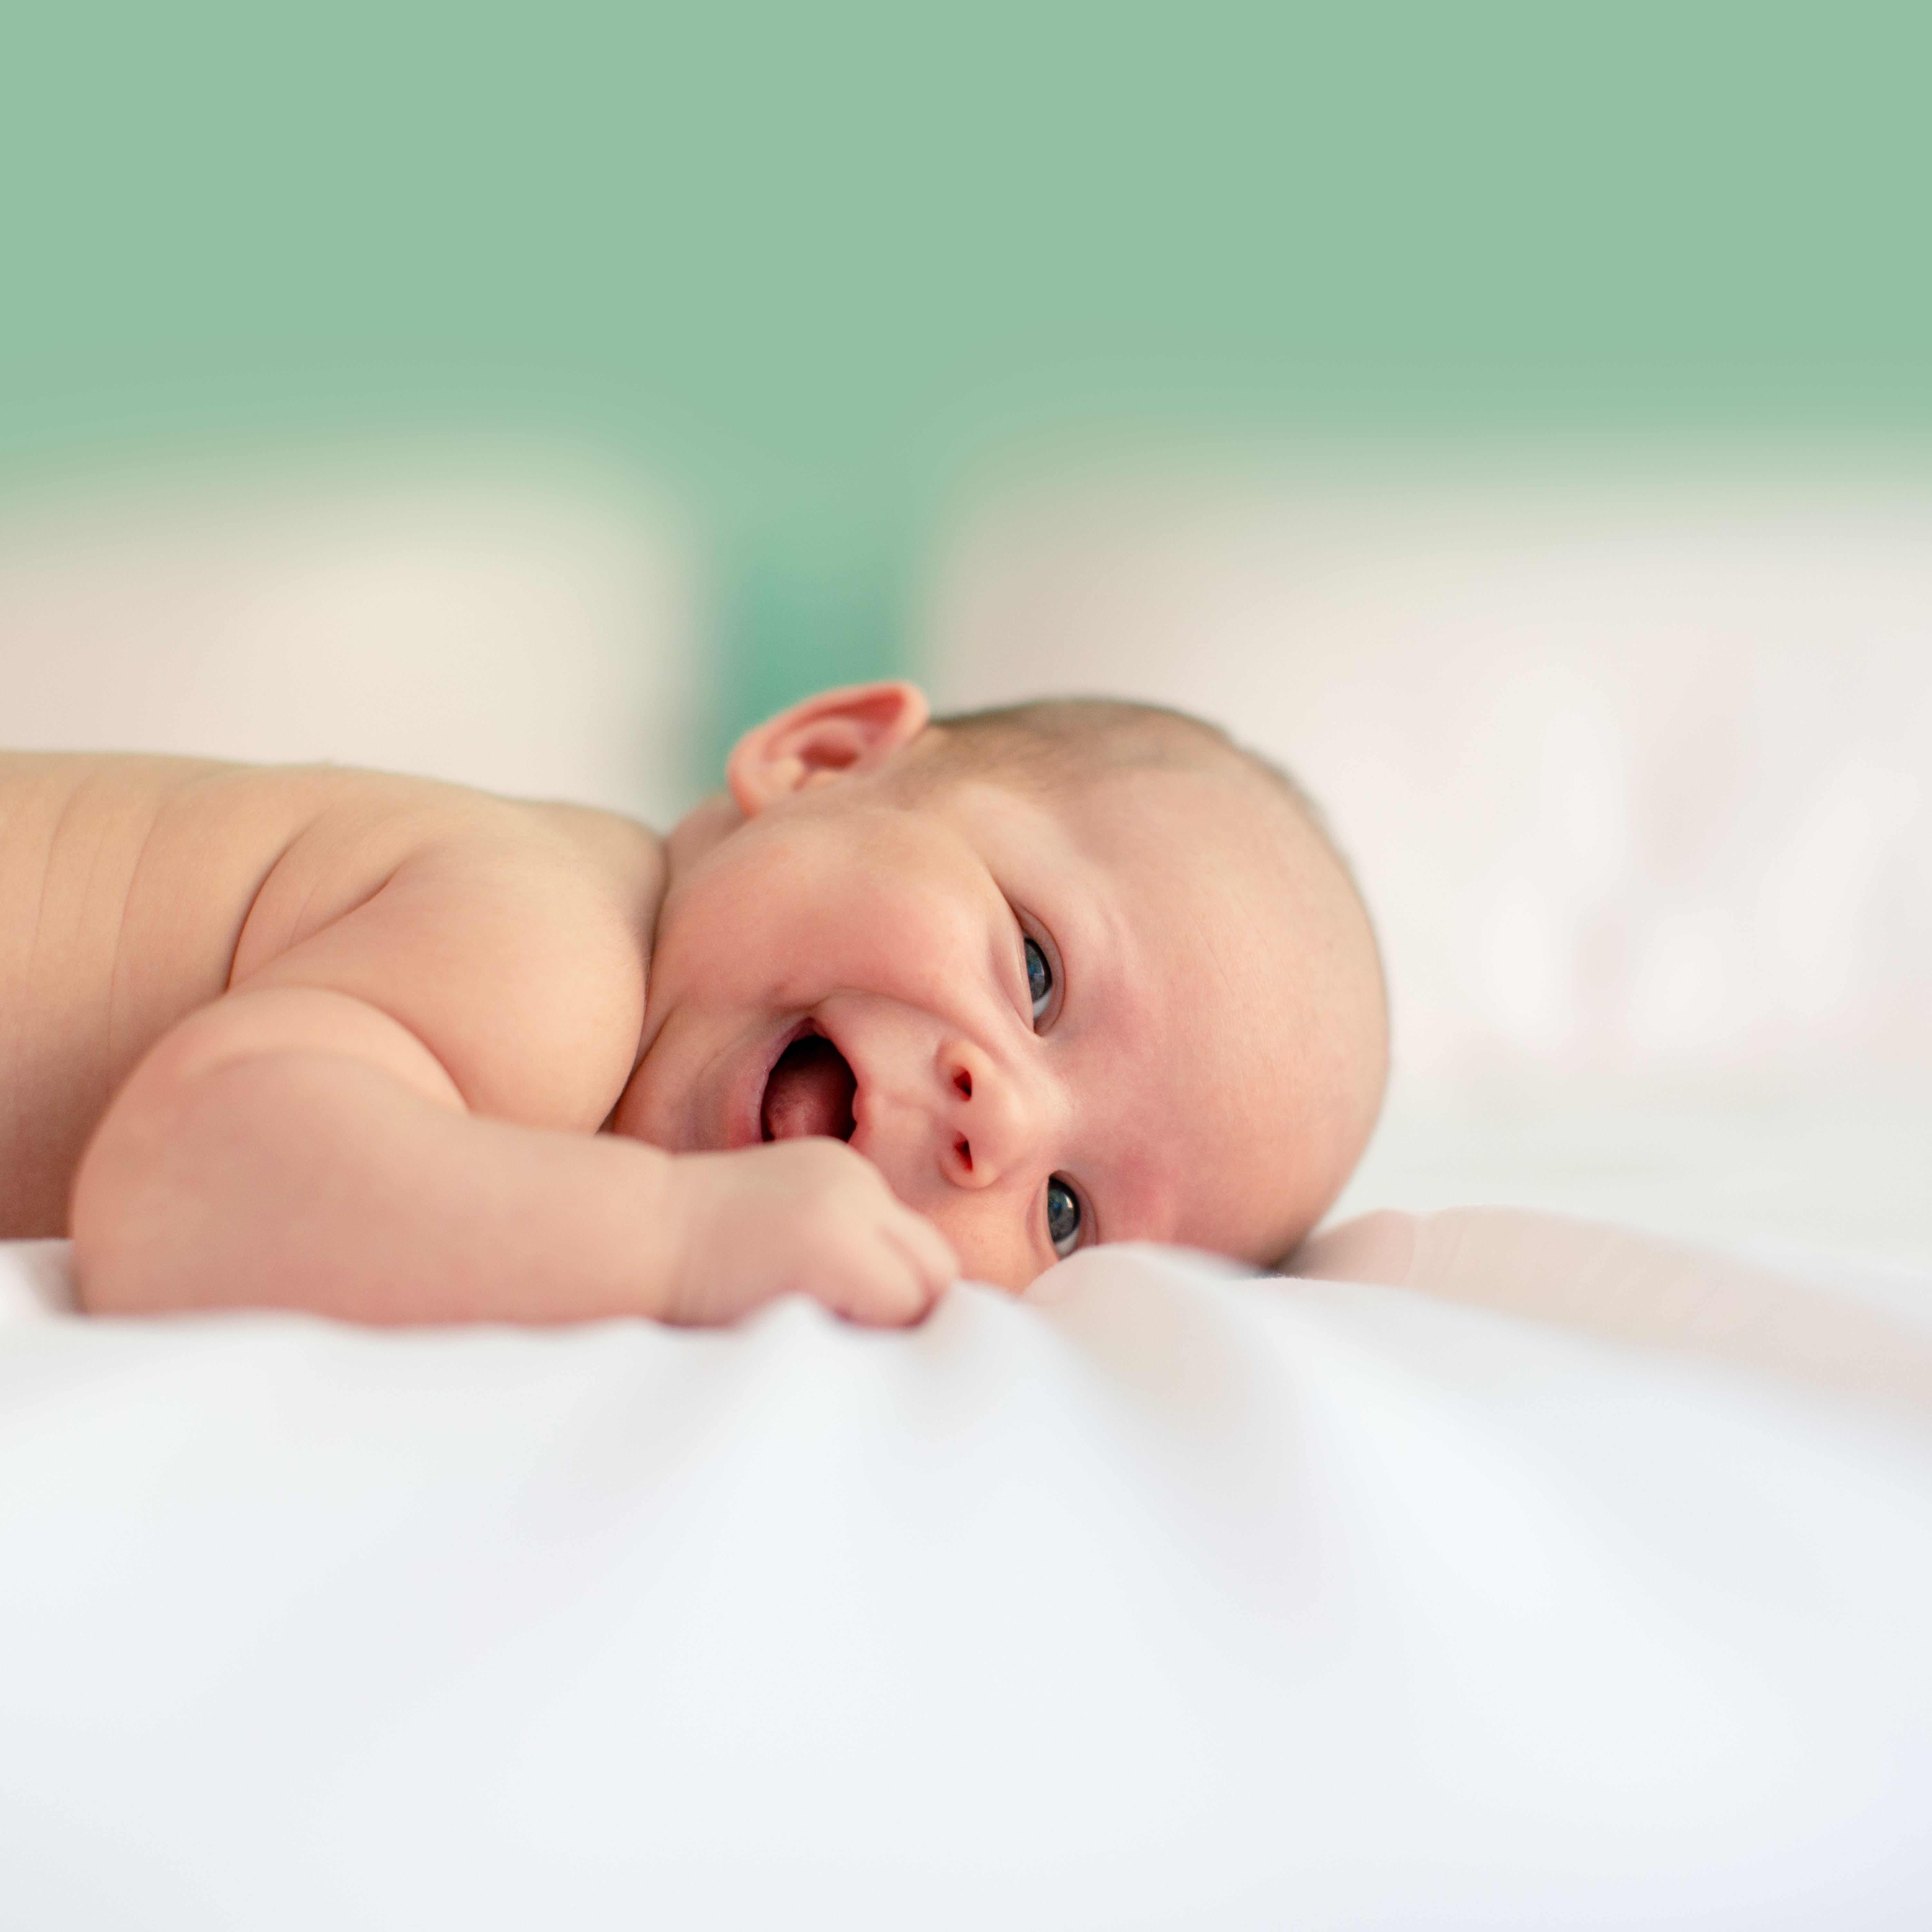 Infant Inclined Sleepers Should be Banned, According to Officials